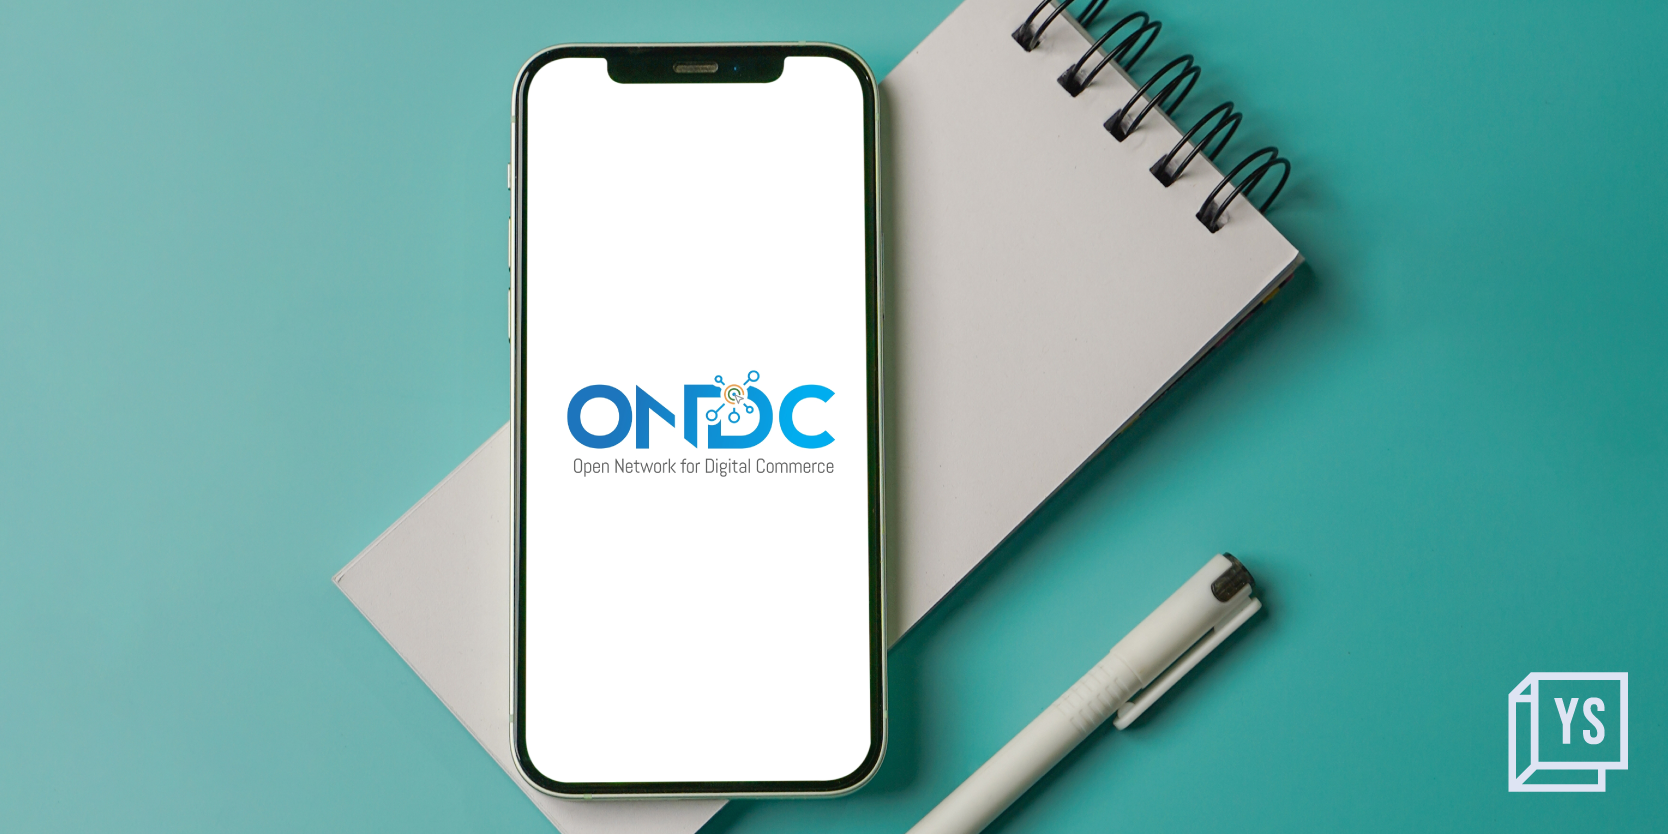 ONDC to touch 10M transactions in June: CBO